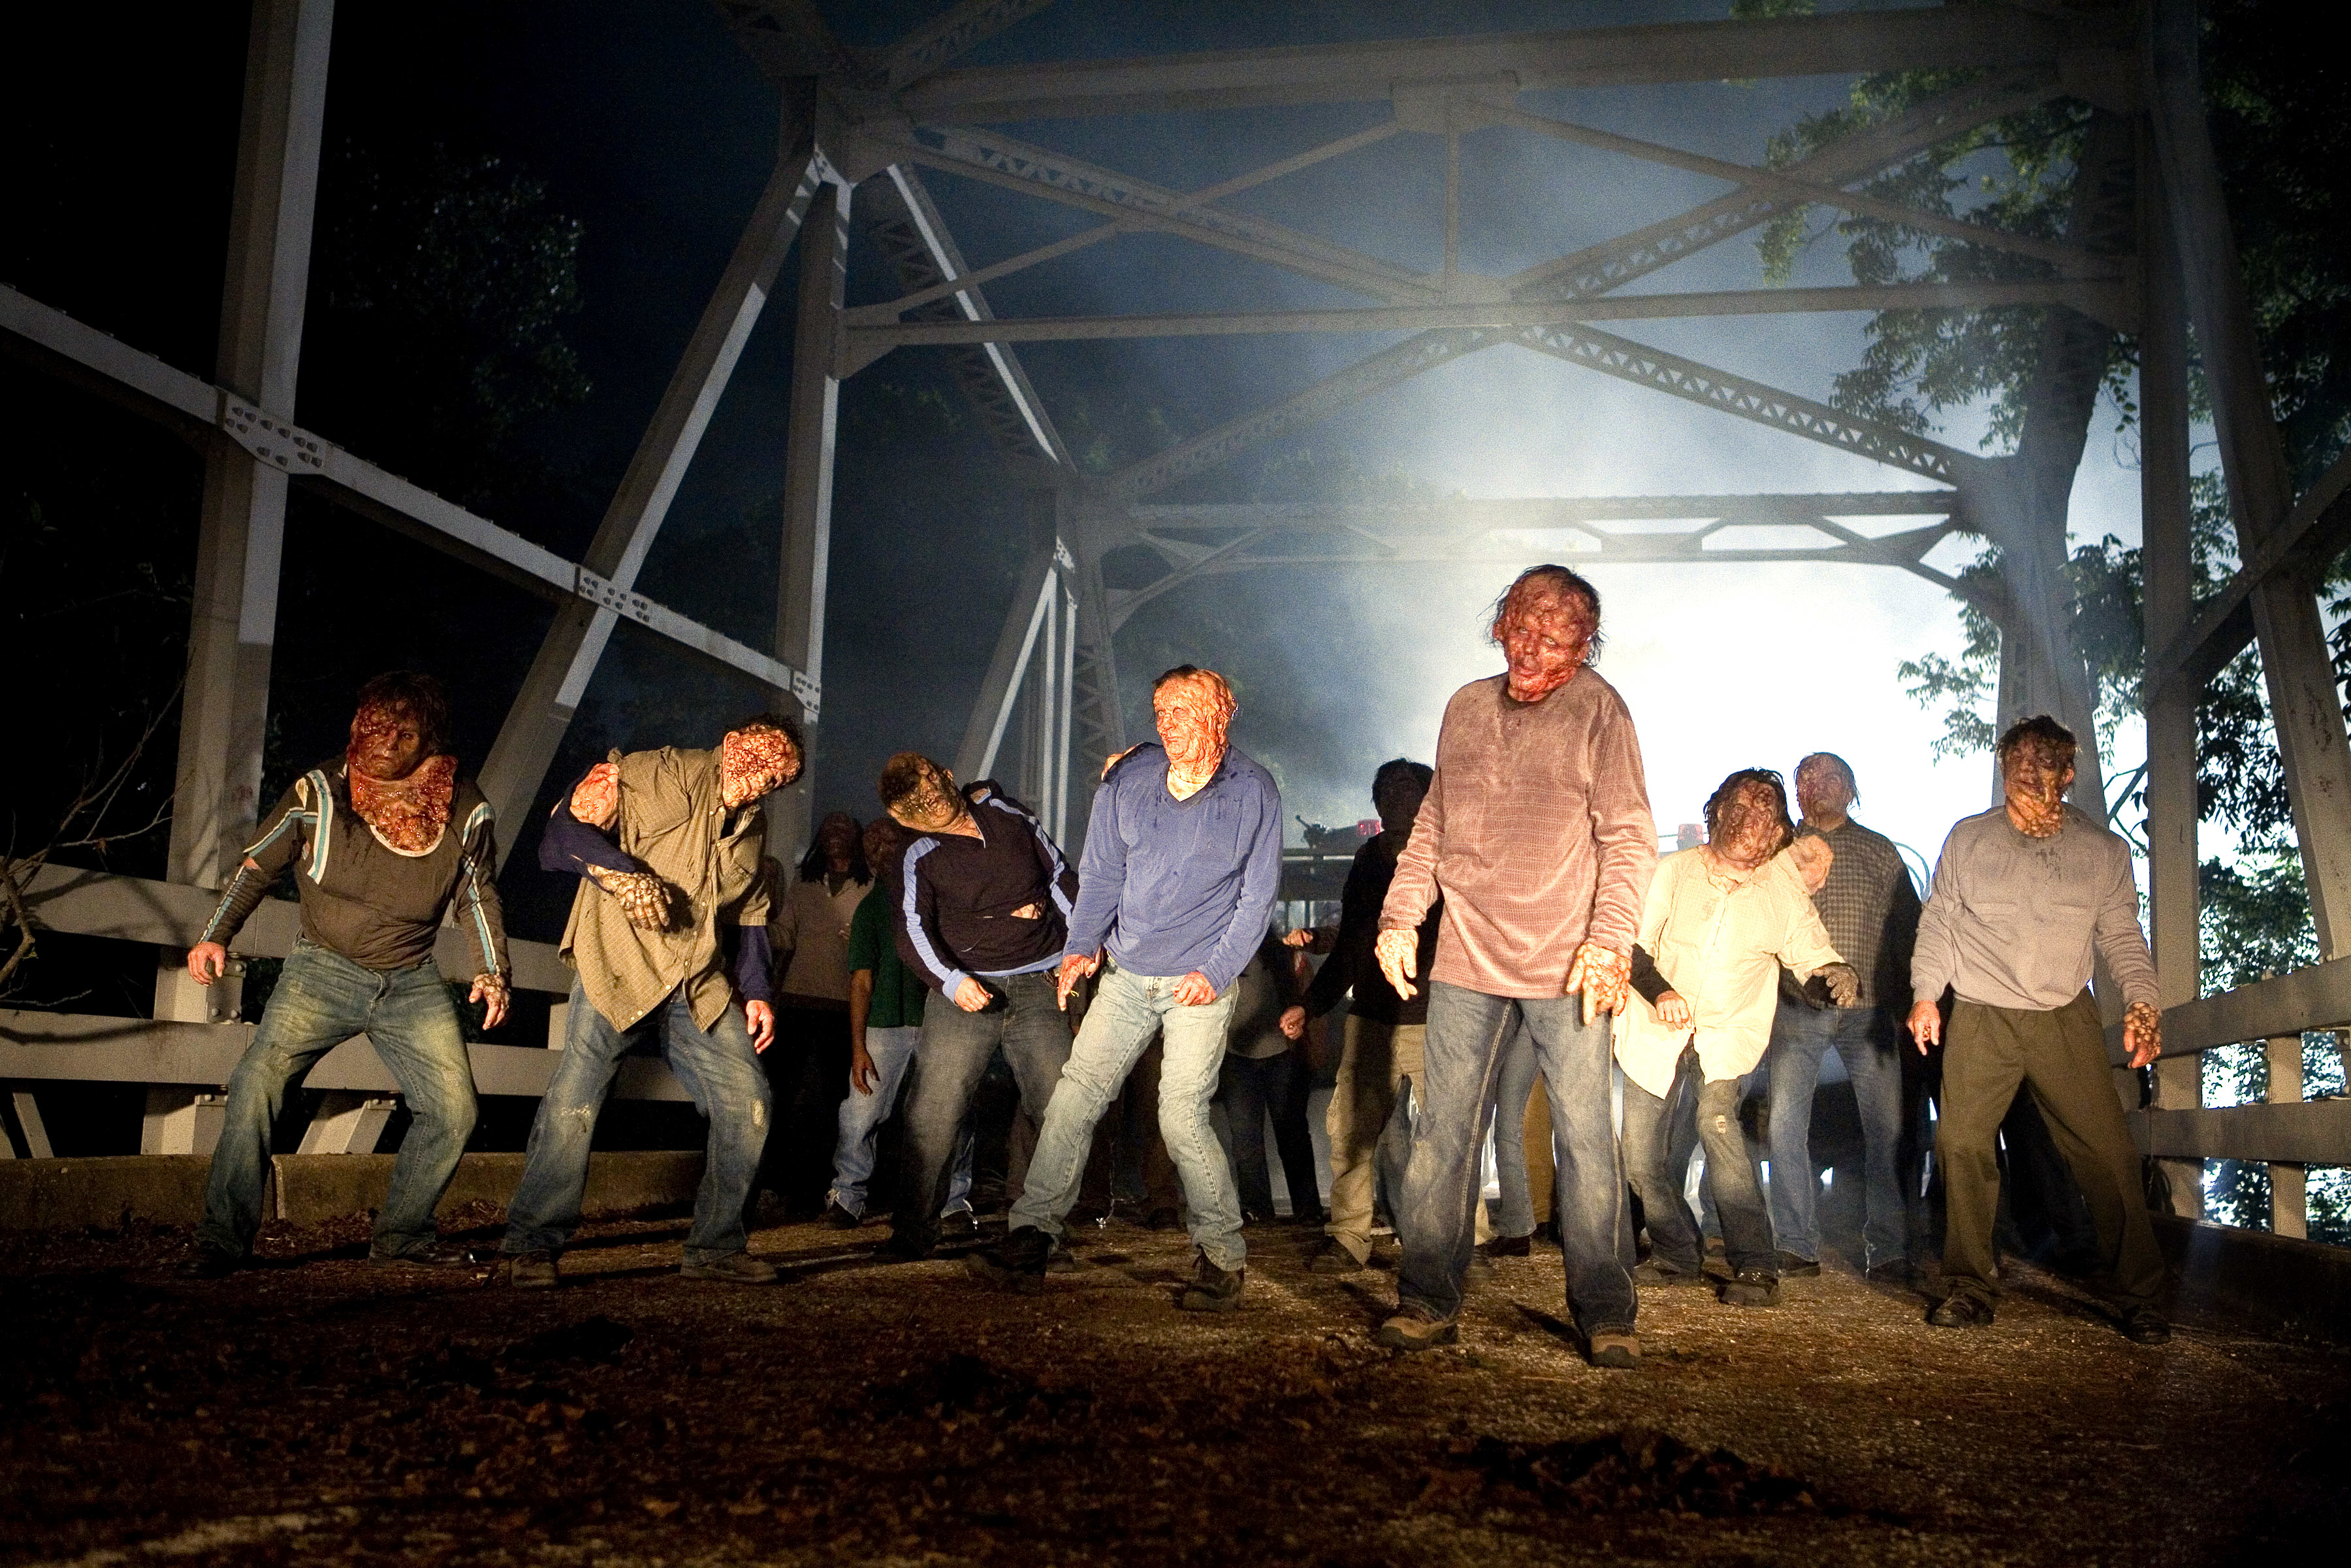 Group of people walking under a bridge, disheveled, as if in a scene from a thriller or horror TV show or movie